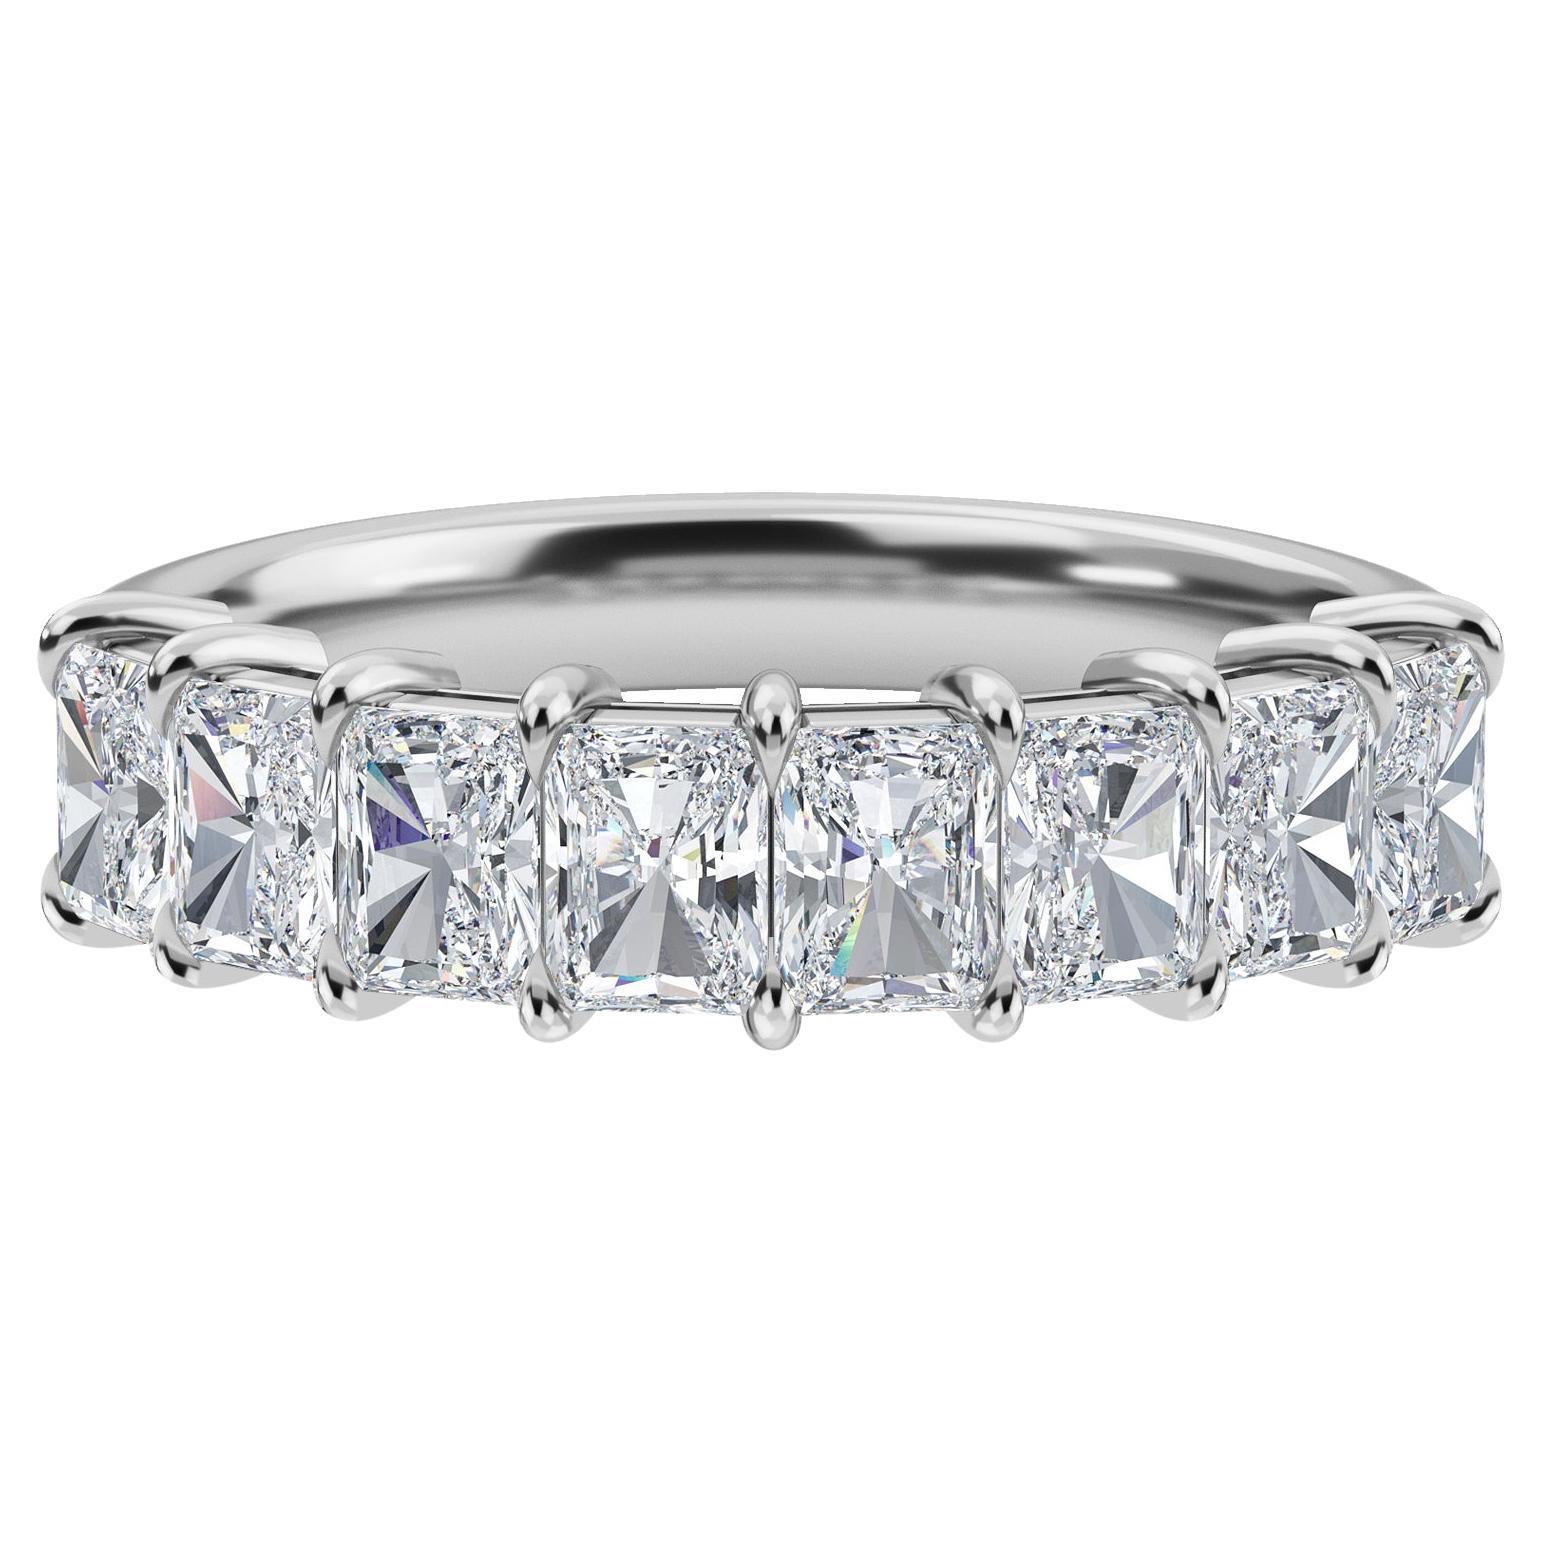 Radiant Diamond Partway Band, 1.69 Total Carat Weight